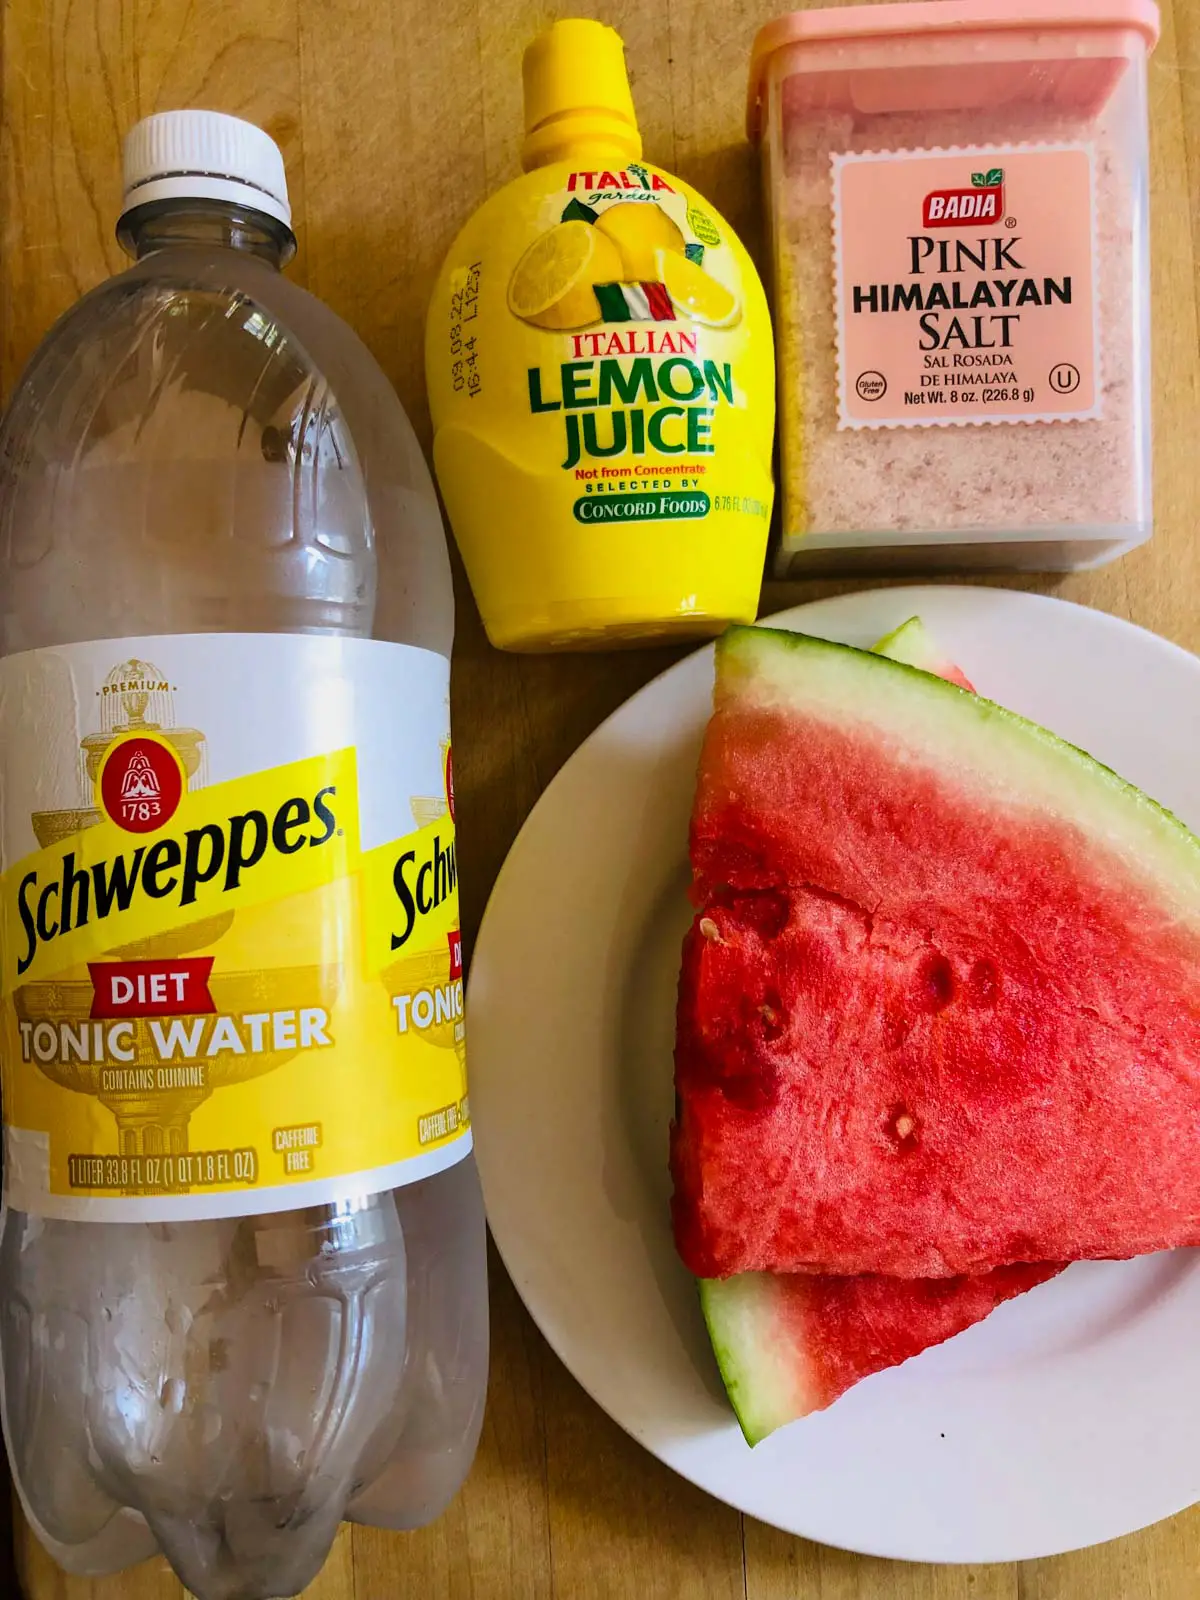 Bottle of Schweppes diet tonic water, lemon juice, pink himalayan salt, and a white plate with watermelon slices.